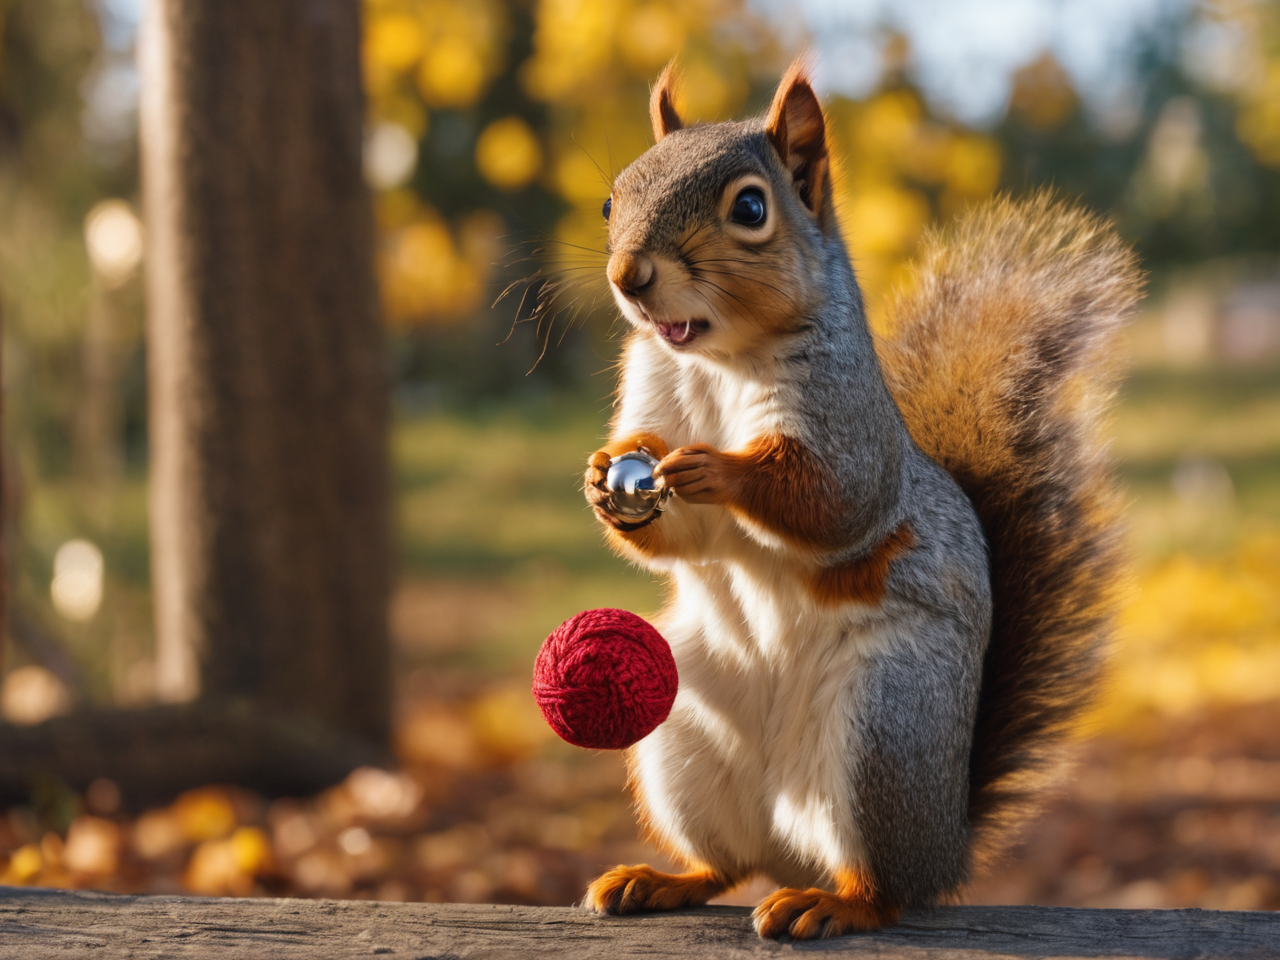 The Tale of Sammy the Mischievous Squirrel: A Lesson in Pranks, Promises, and Shiny Doorknobs